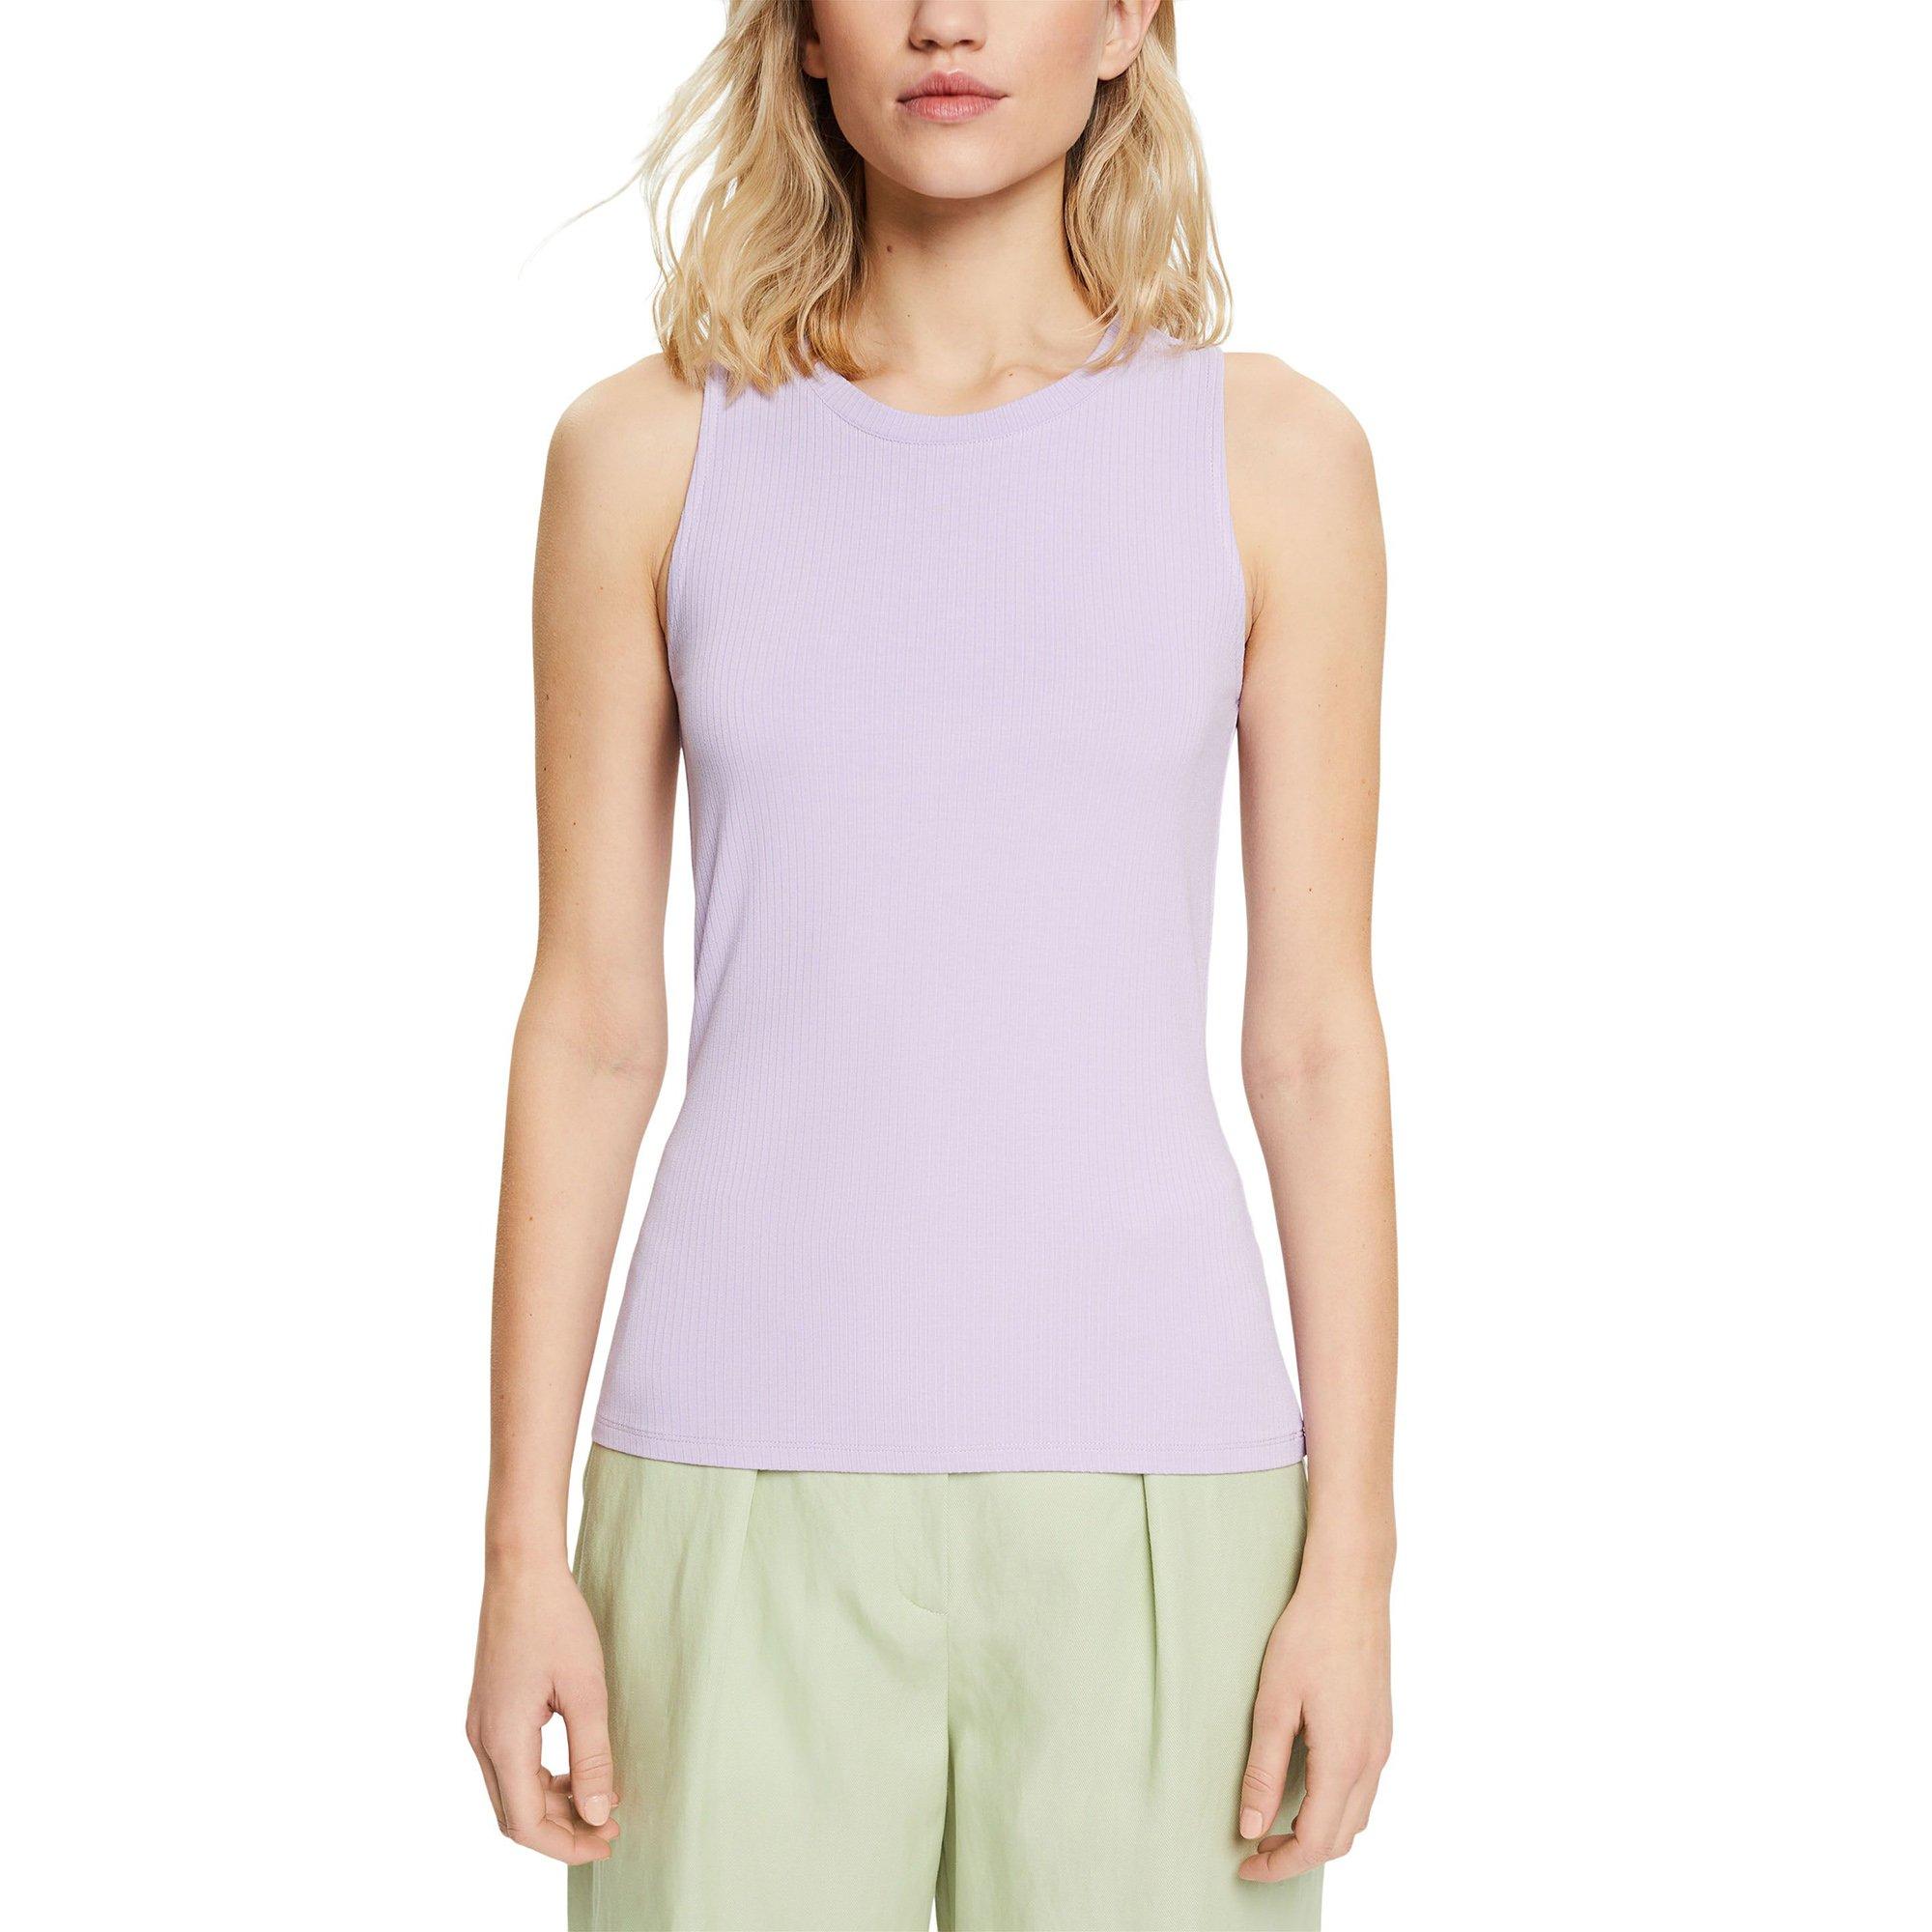 Image of ESPRIT collection Top - XL